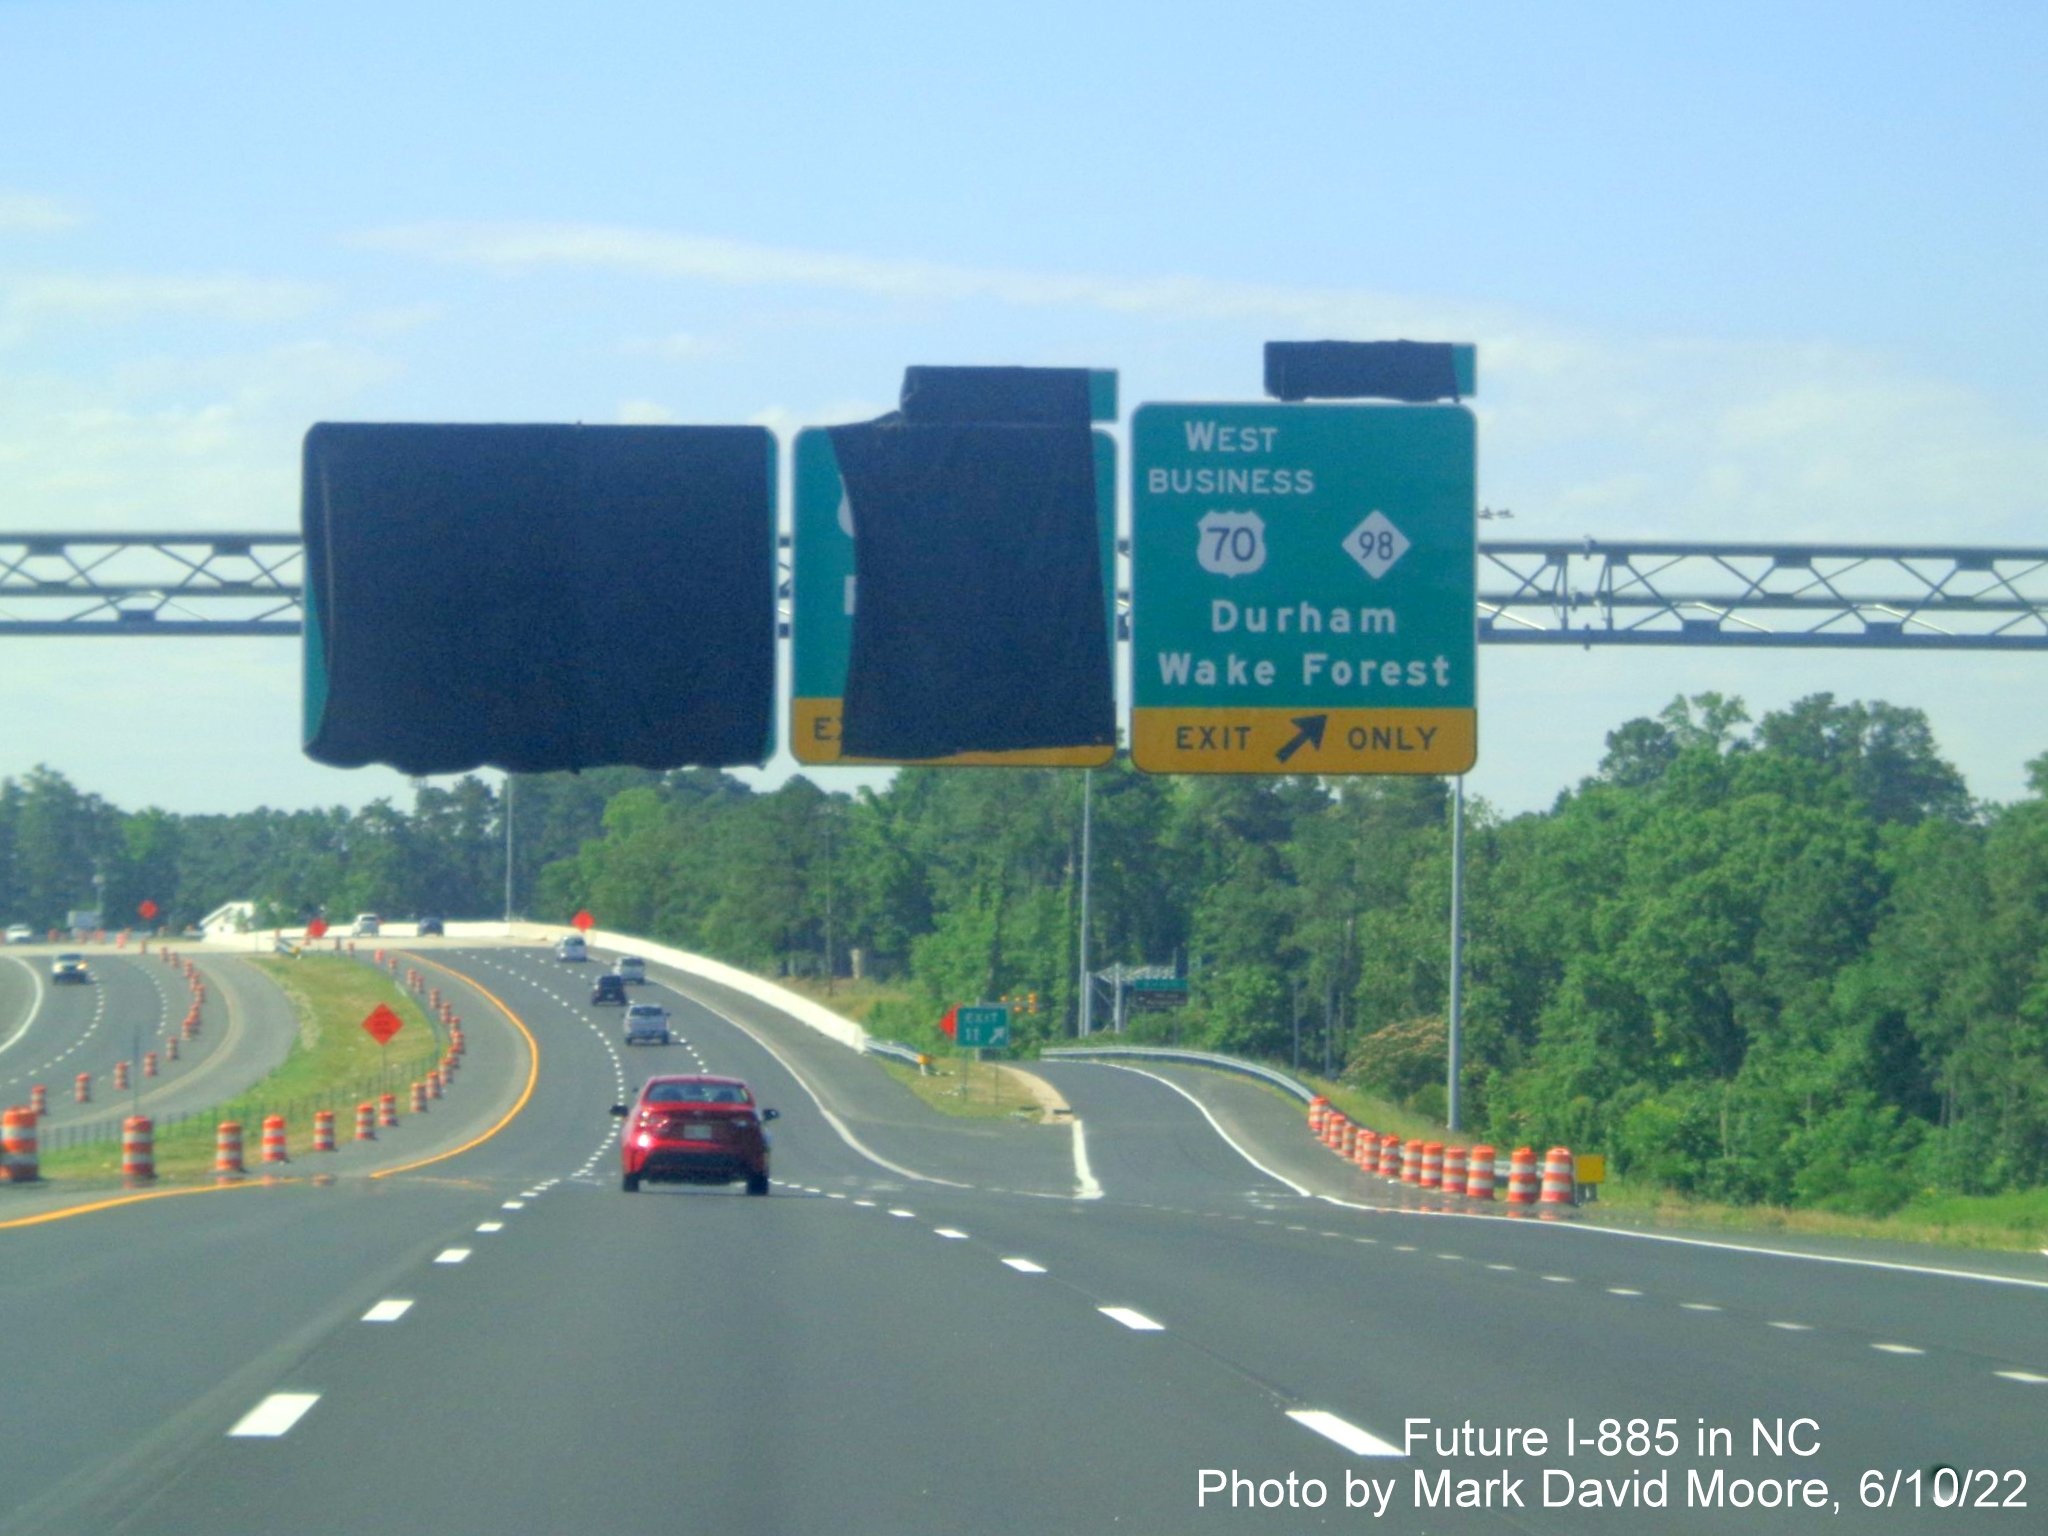 Image of overhead signage at ramp for US 70 Bus. West/NC 98 exit
       with exit tab still covered over on Future I-885 South/US 70 East in Durham, by Mark David Moore June 2022